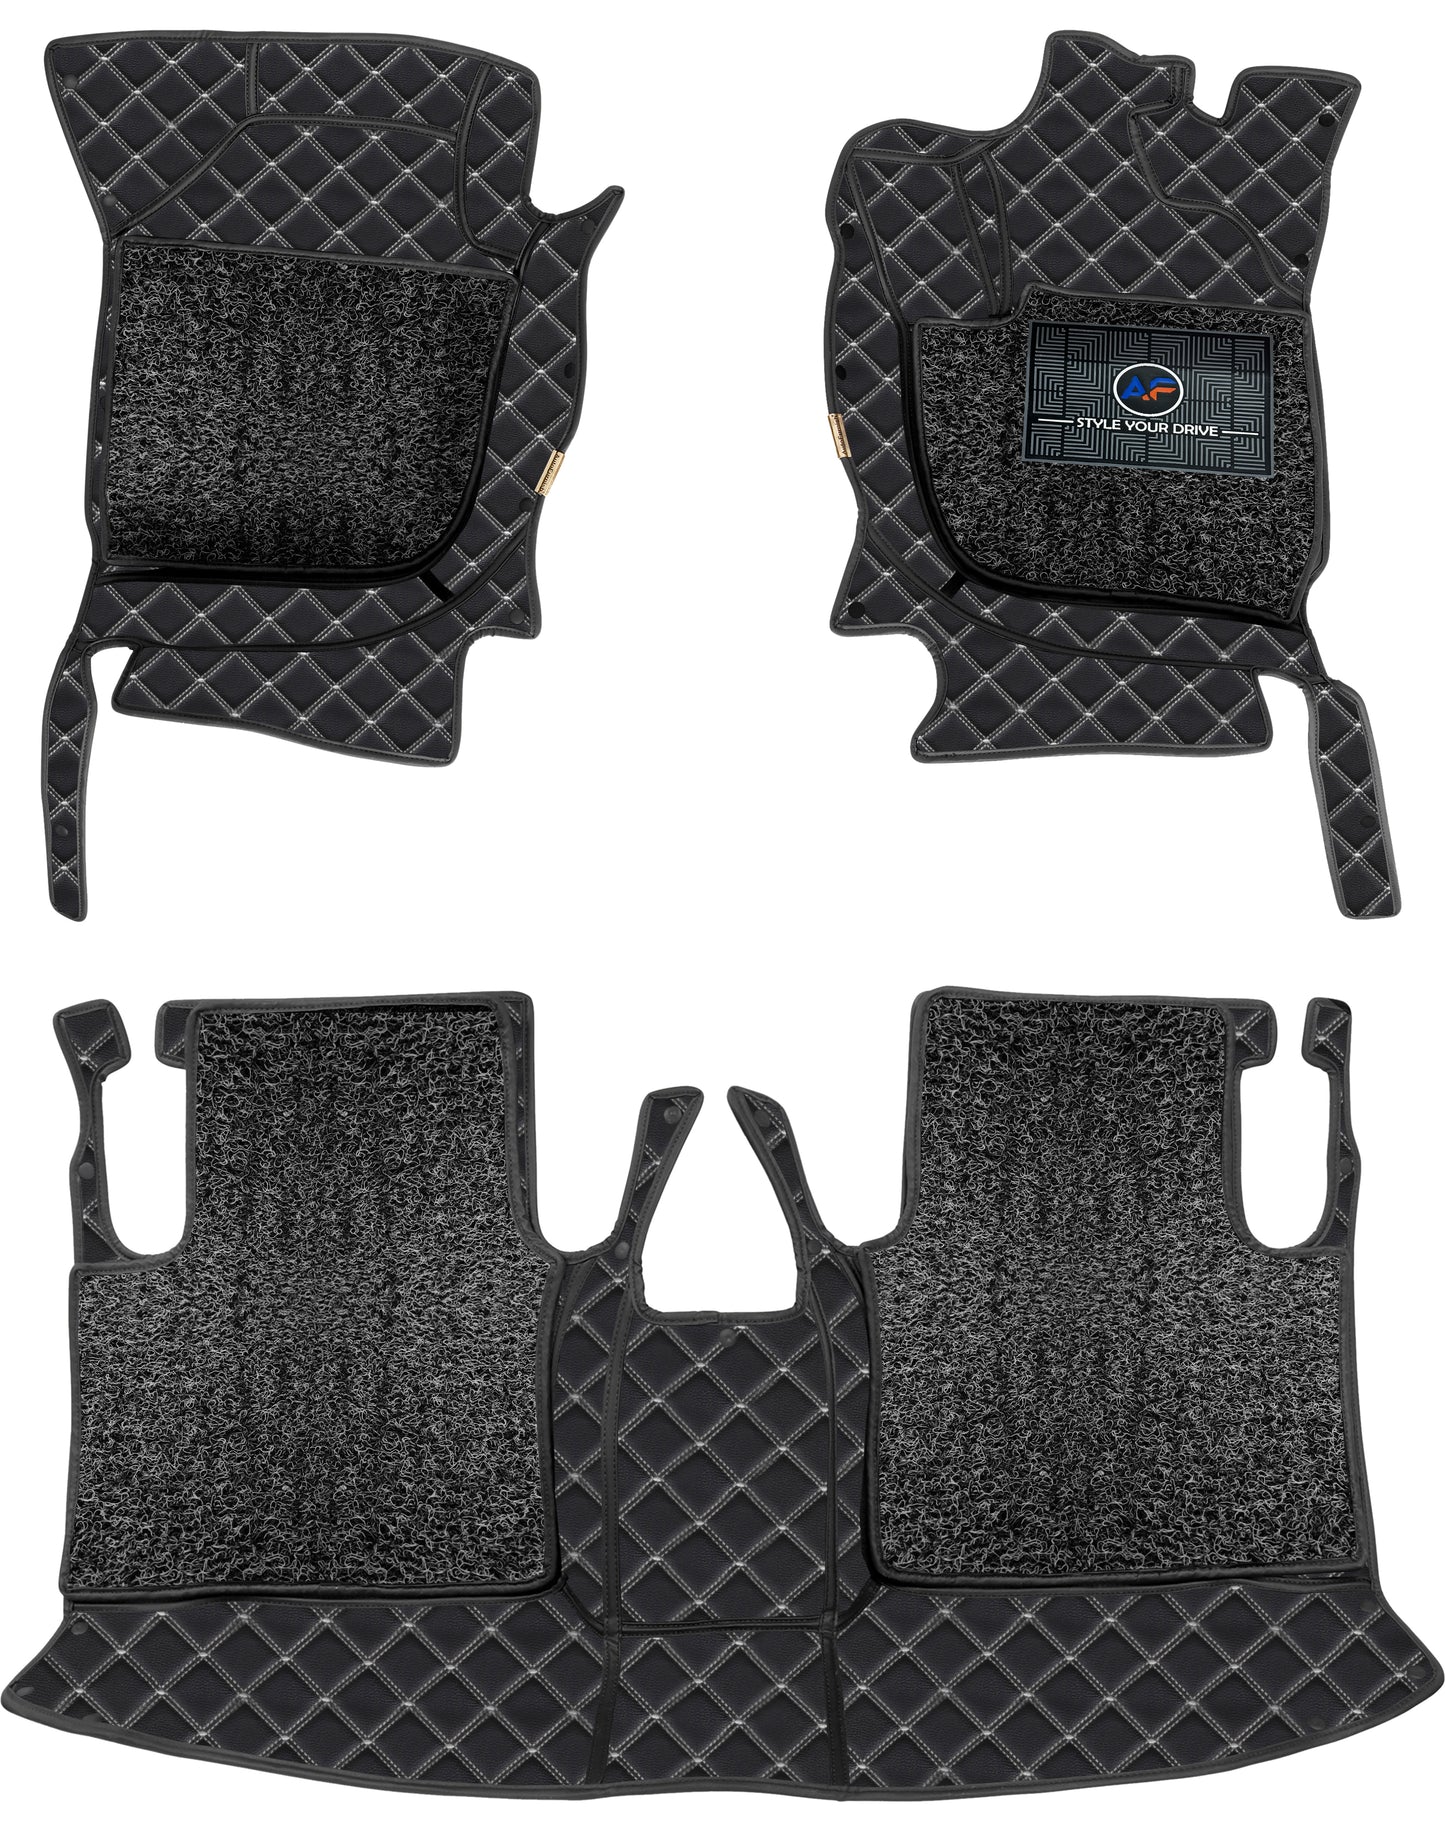 Lexus RX450hL 2022-7D Luxury Car Mat, All Weather Proof, Anti-Skid, 100% Waterproof & Odorless with Unique Diamond Fish Design (24mm Luxury PU Leather, 2 Rows)